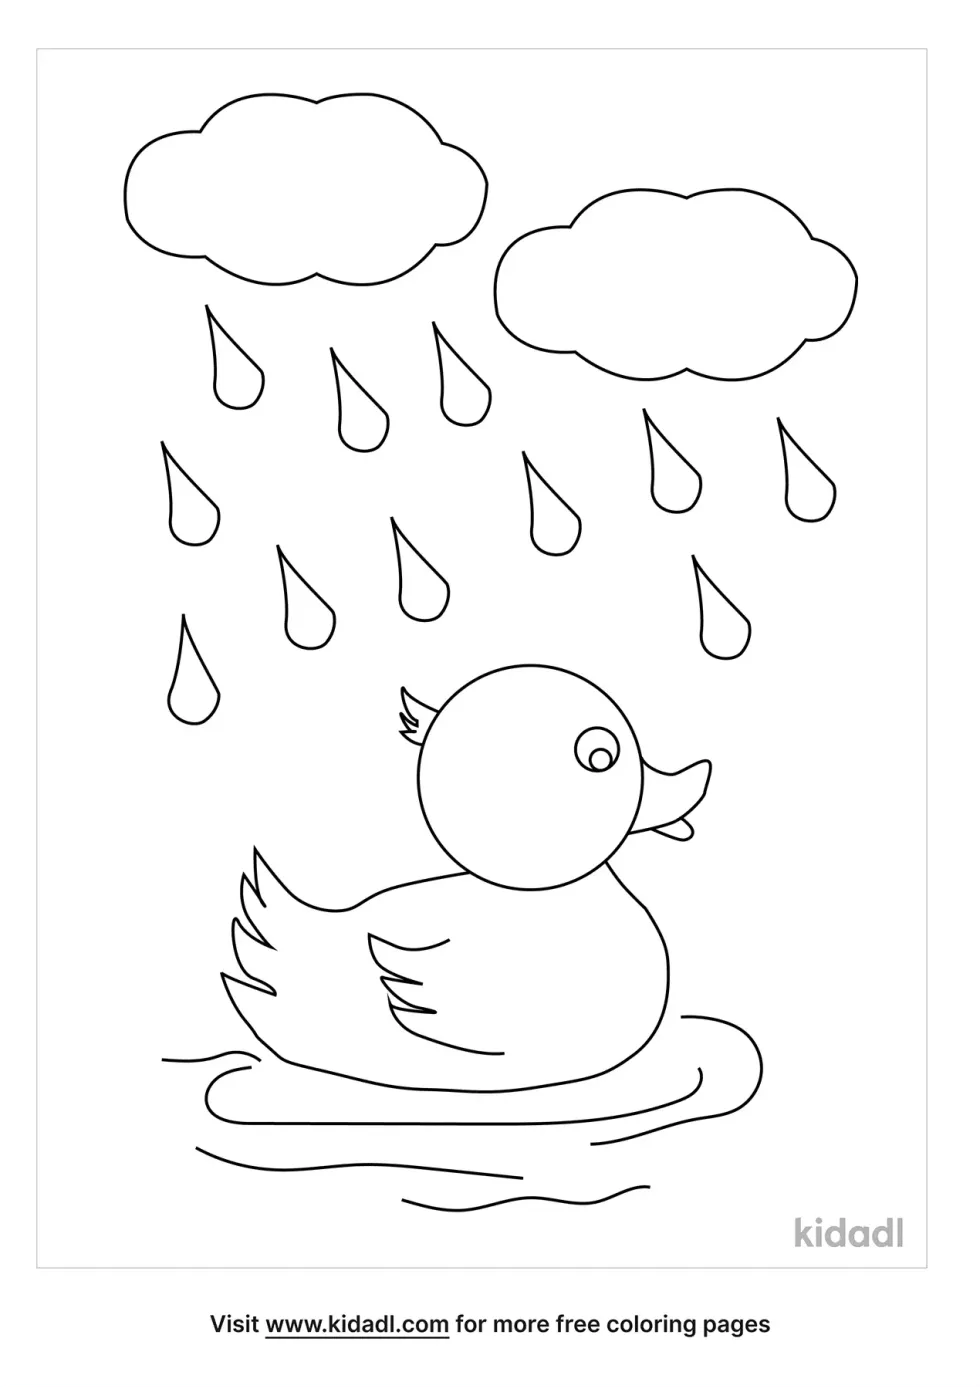 Duck In The Rain Coloring Page